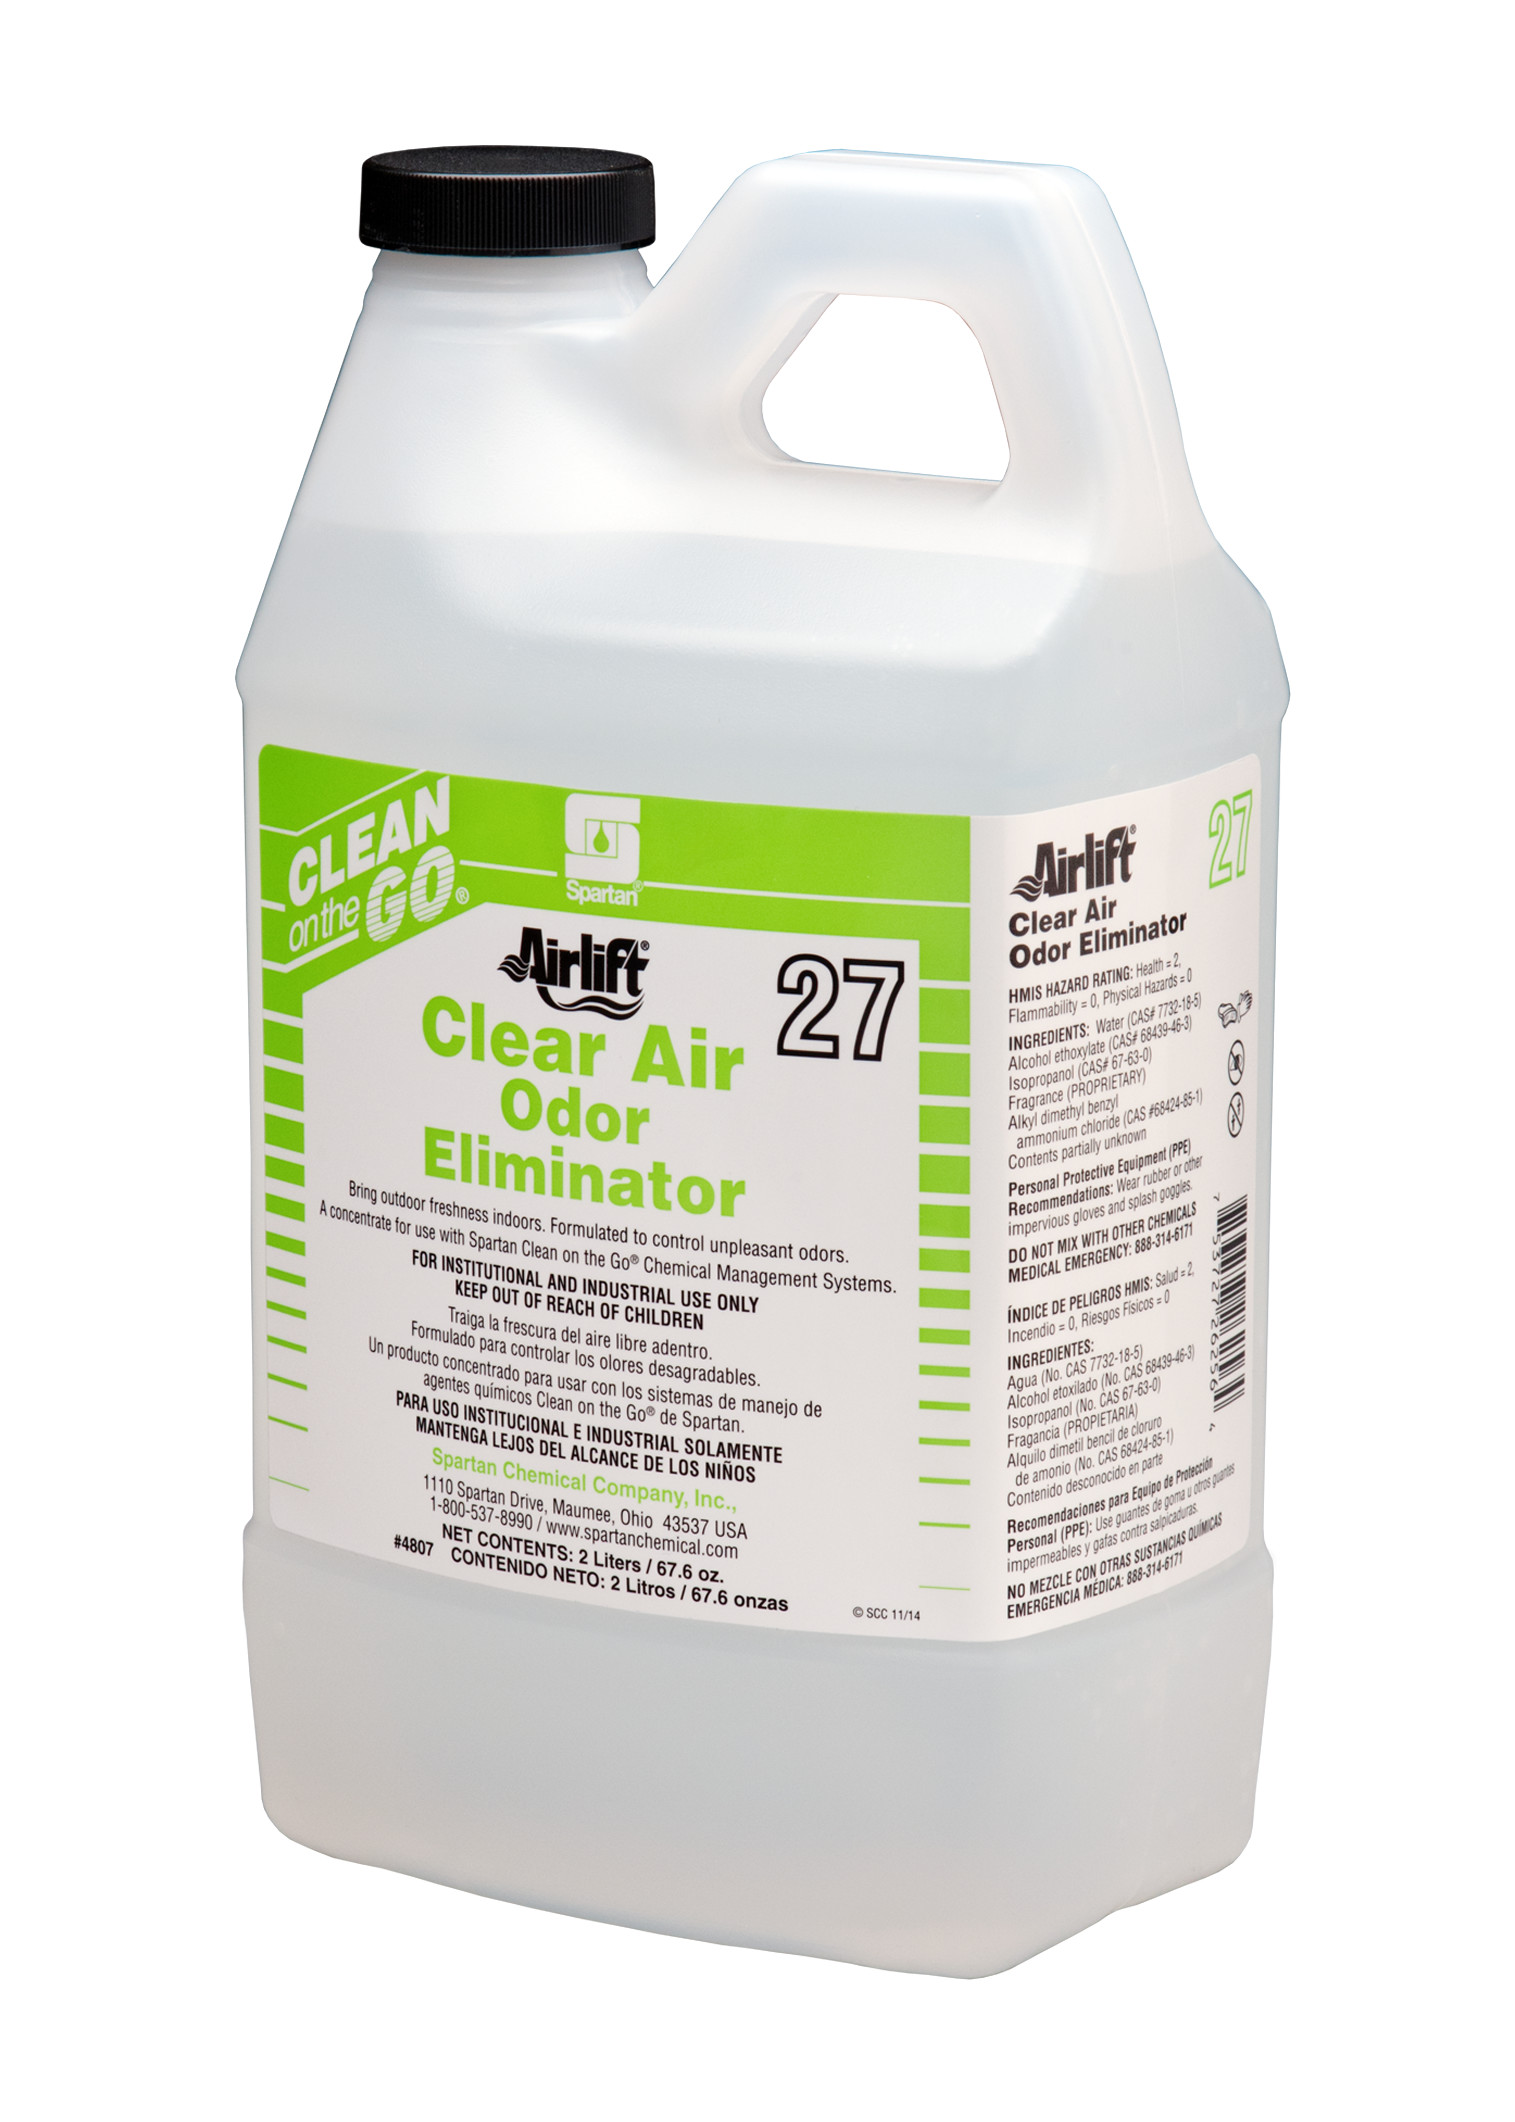 Spartan Chemical Company Airlift Clear Air Odor Eliminator 27, 2 Liter